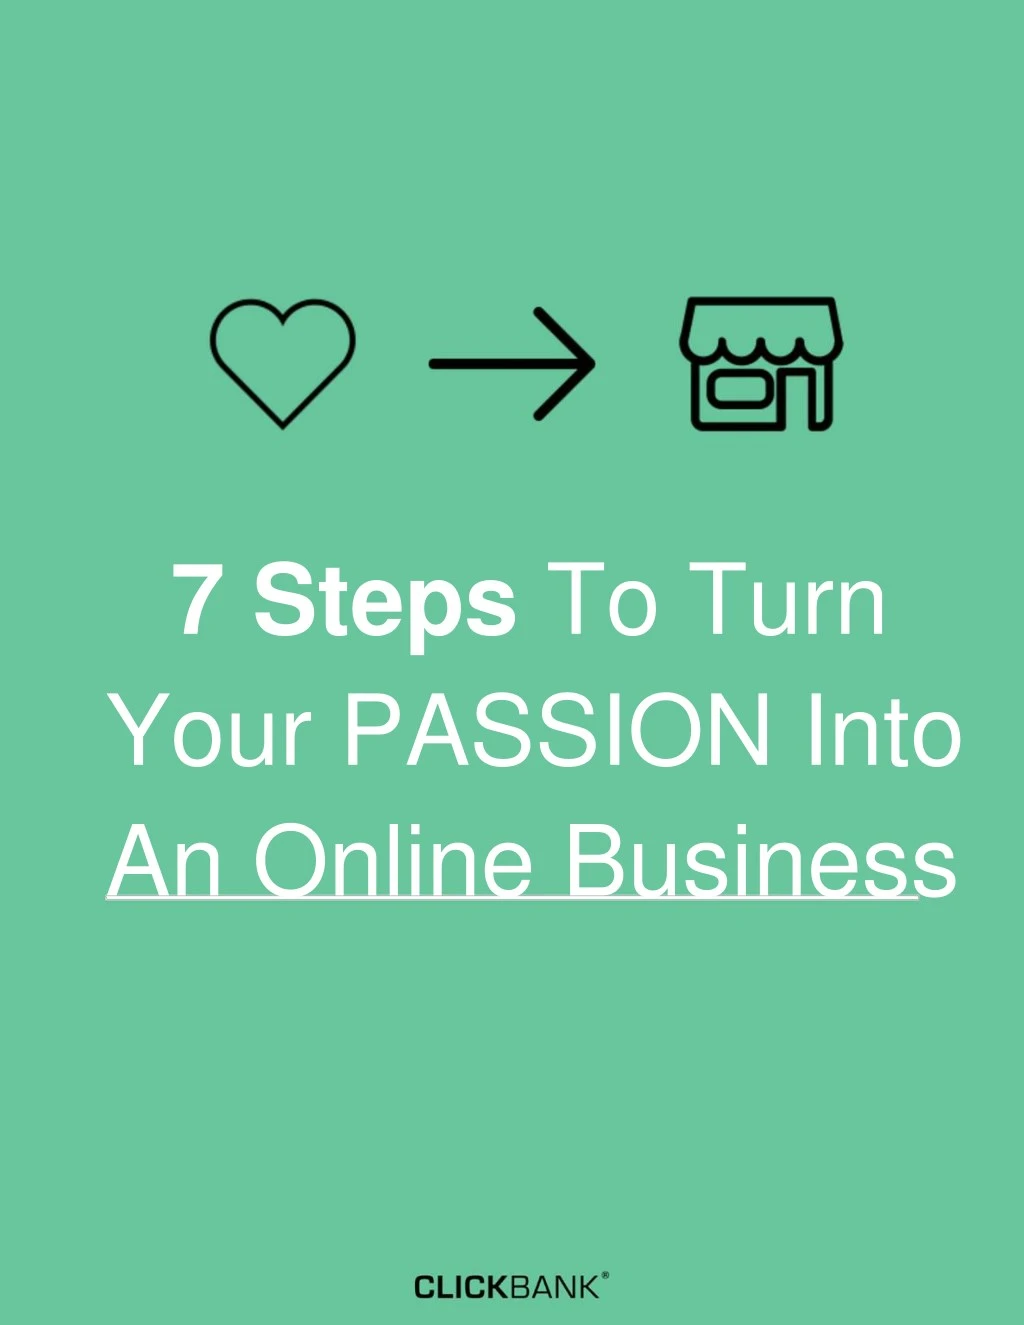 7 steps to turn your passion into an online